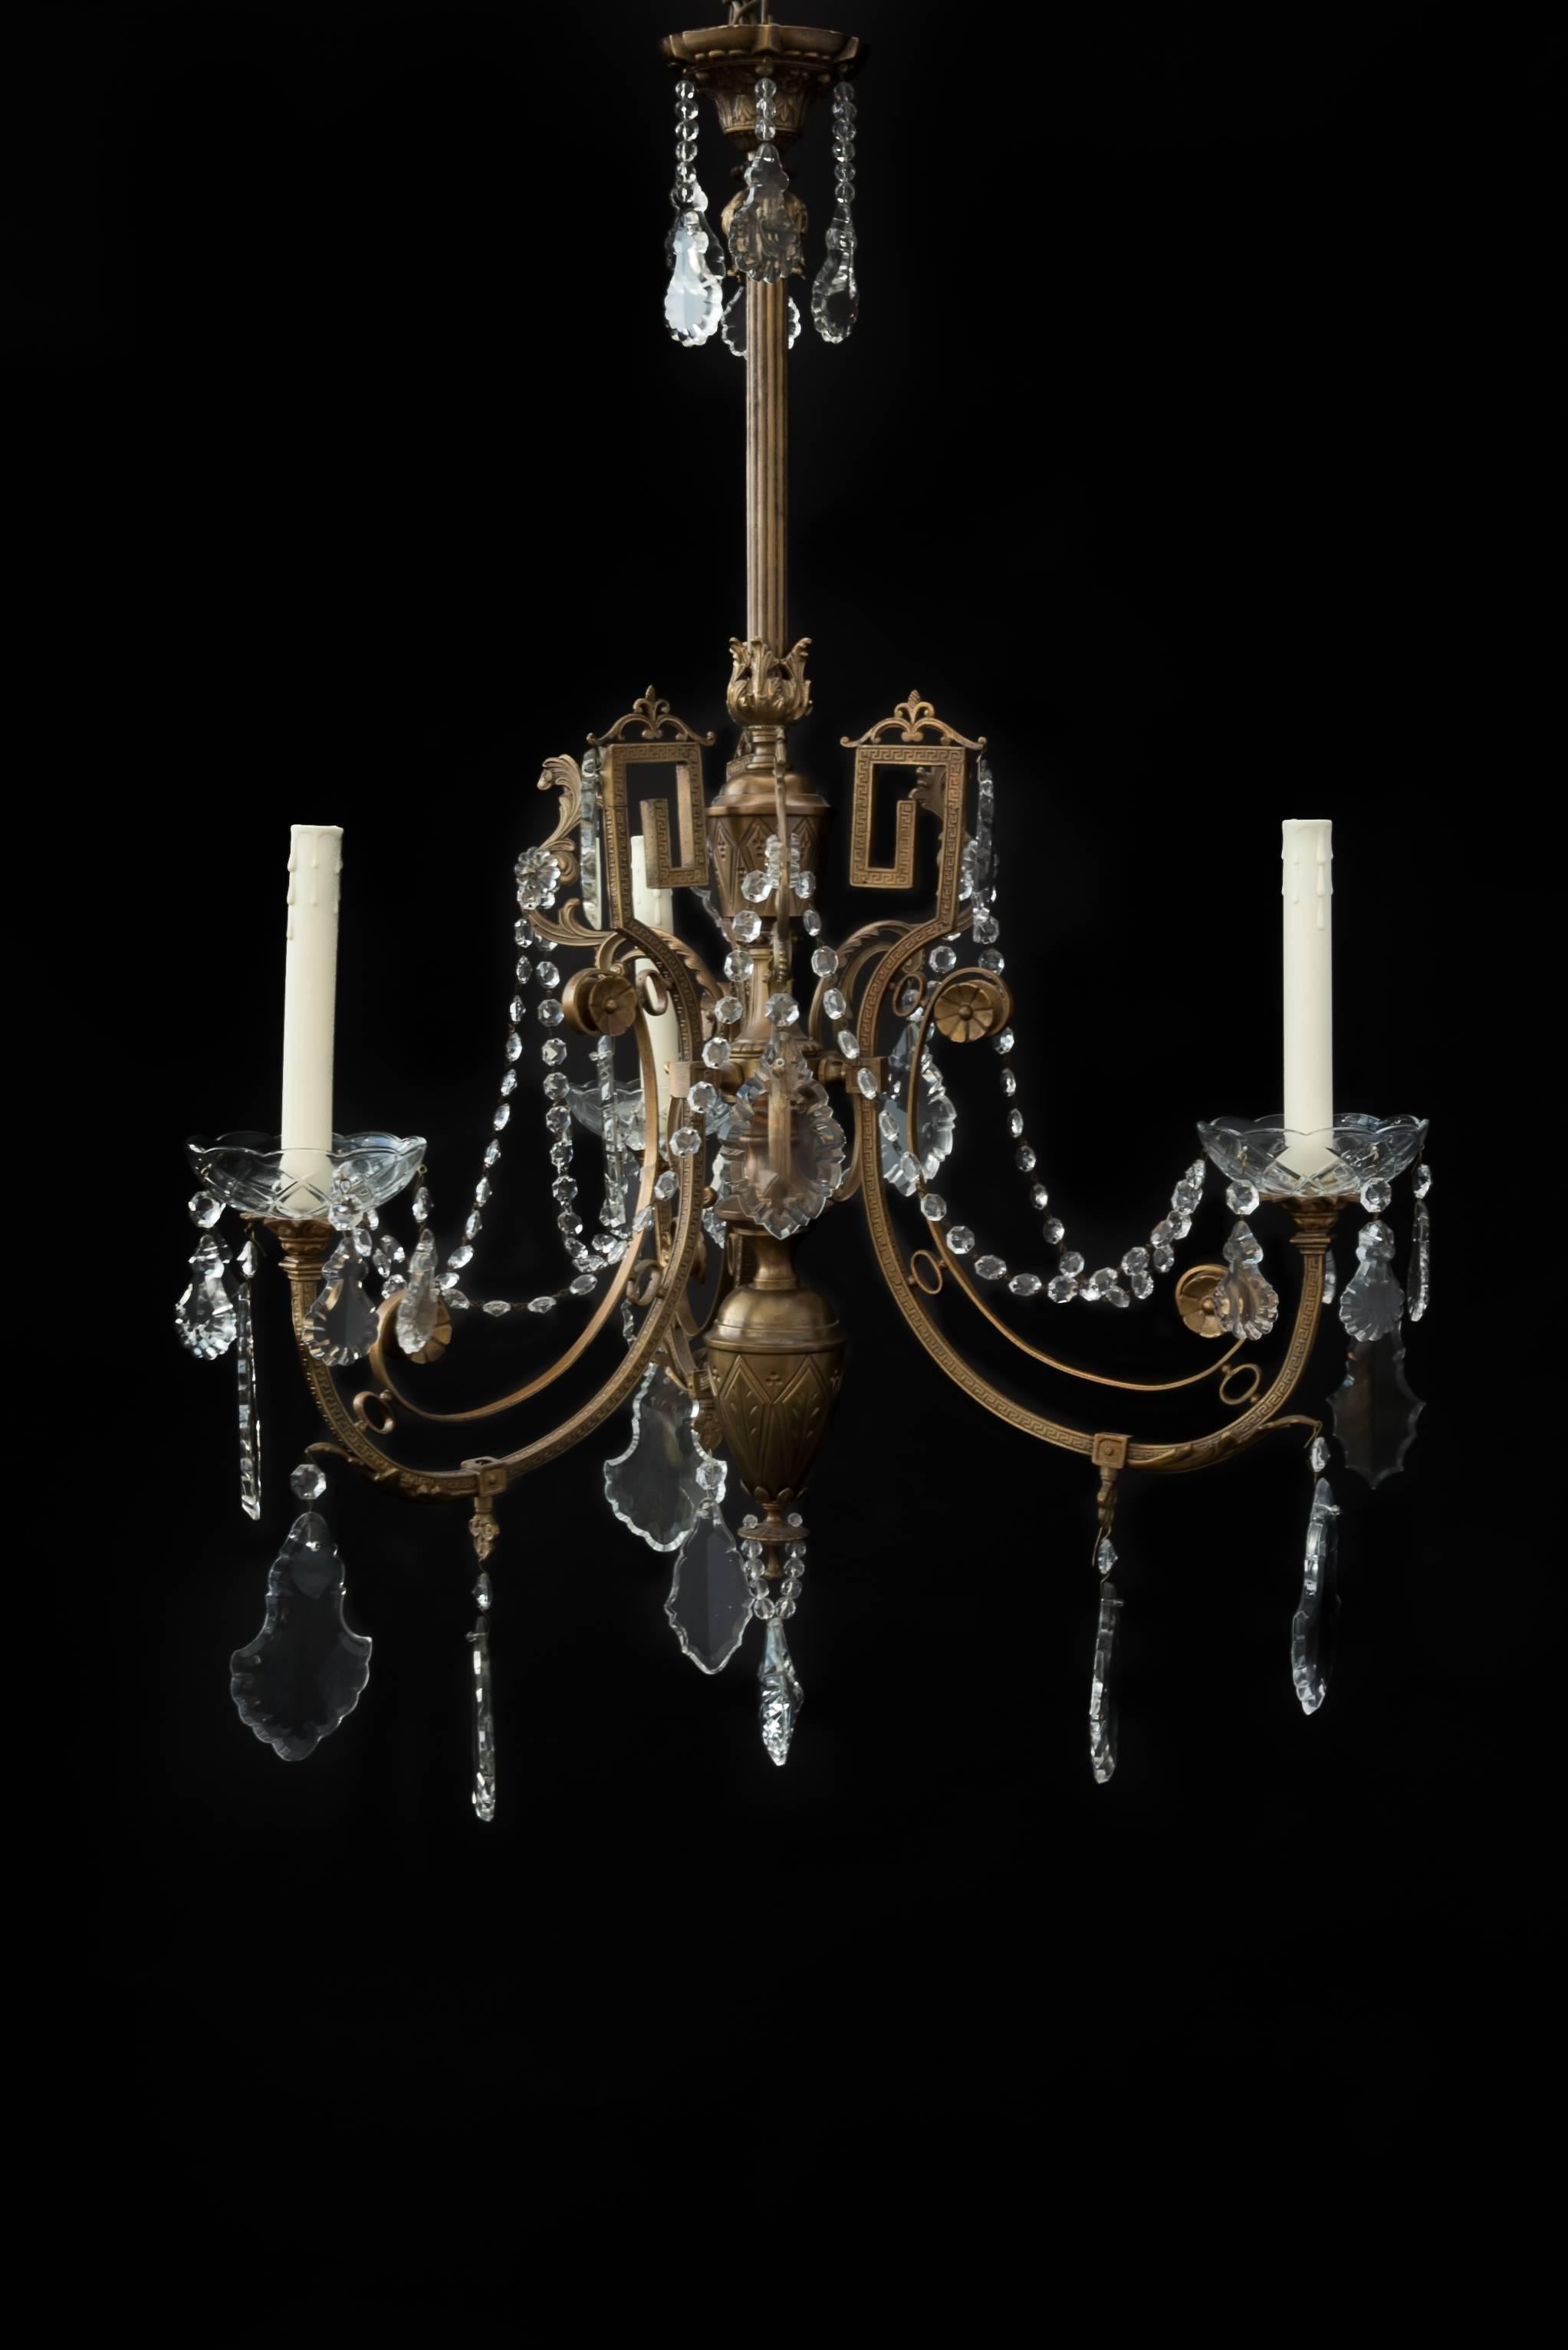 Beautiful French chandelier in neoclassical style.
This original gas chandelier is made in Paris, circa 1860.
With original beautiful hand-cut crystals.
Particularly elegant antique chandelier.